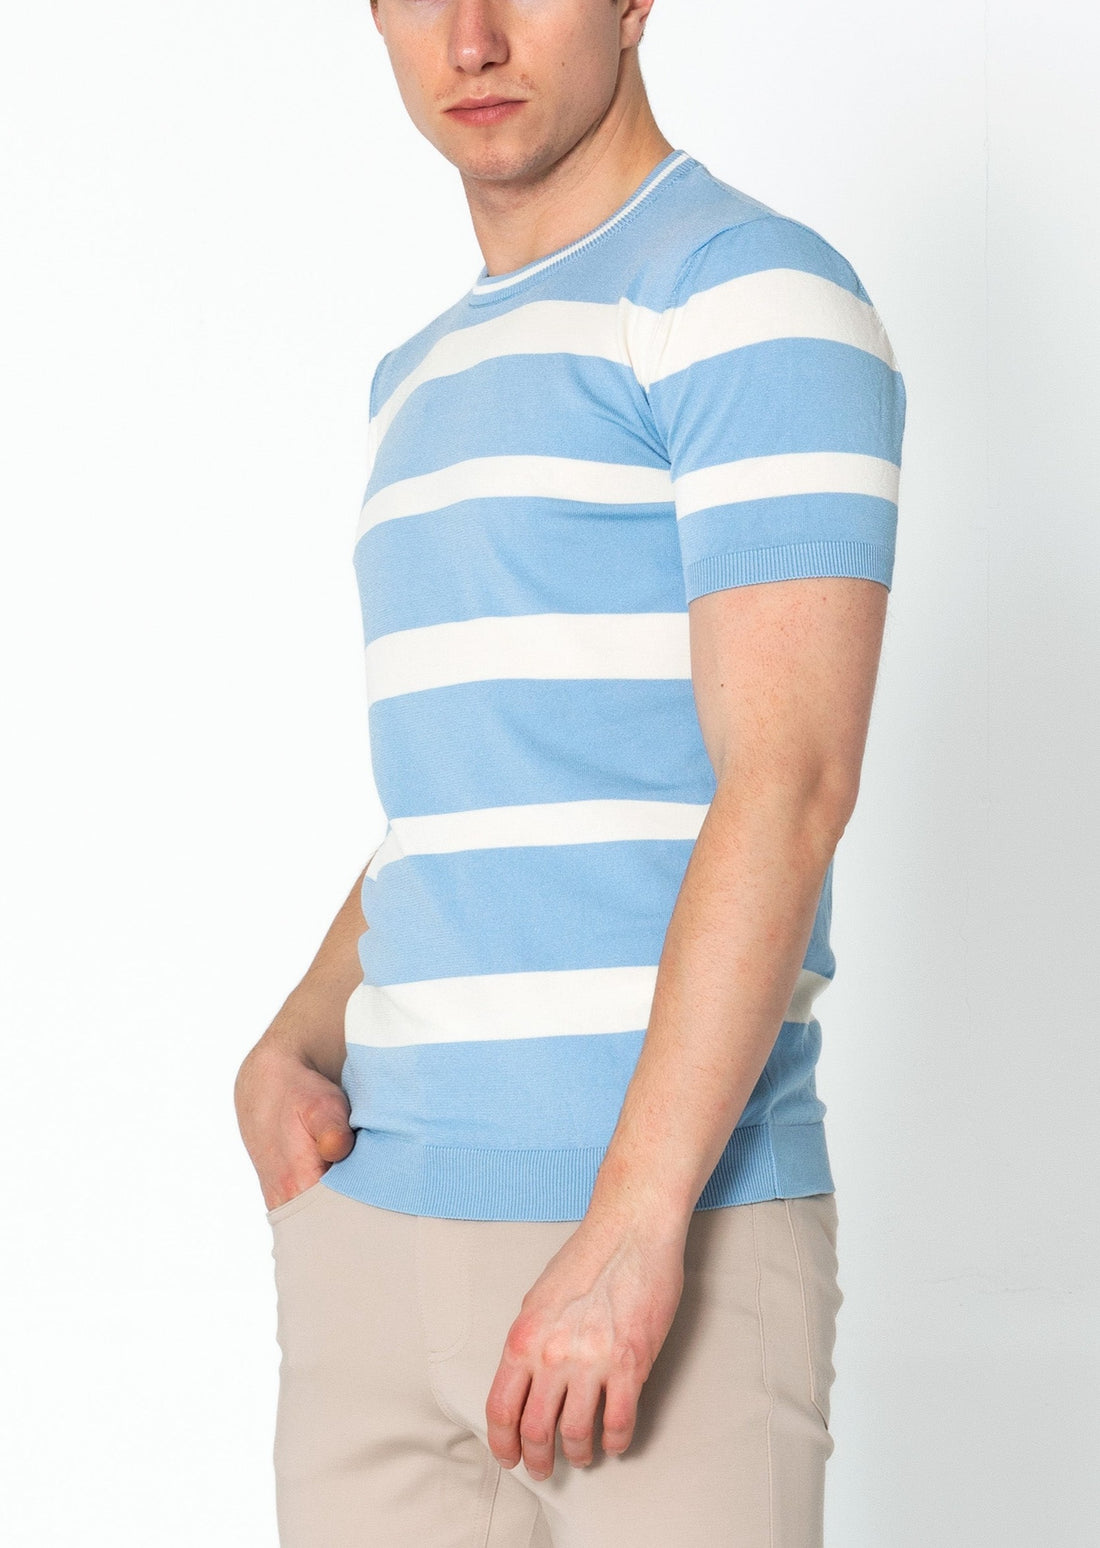 Crew-neck Knitted Striped Shirt - Blue